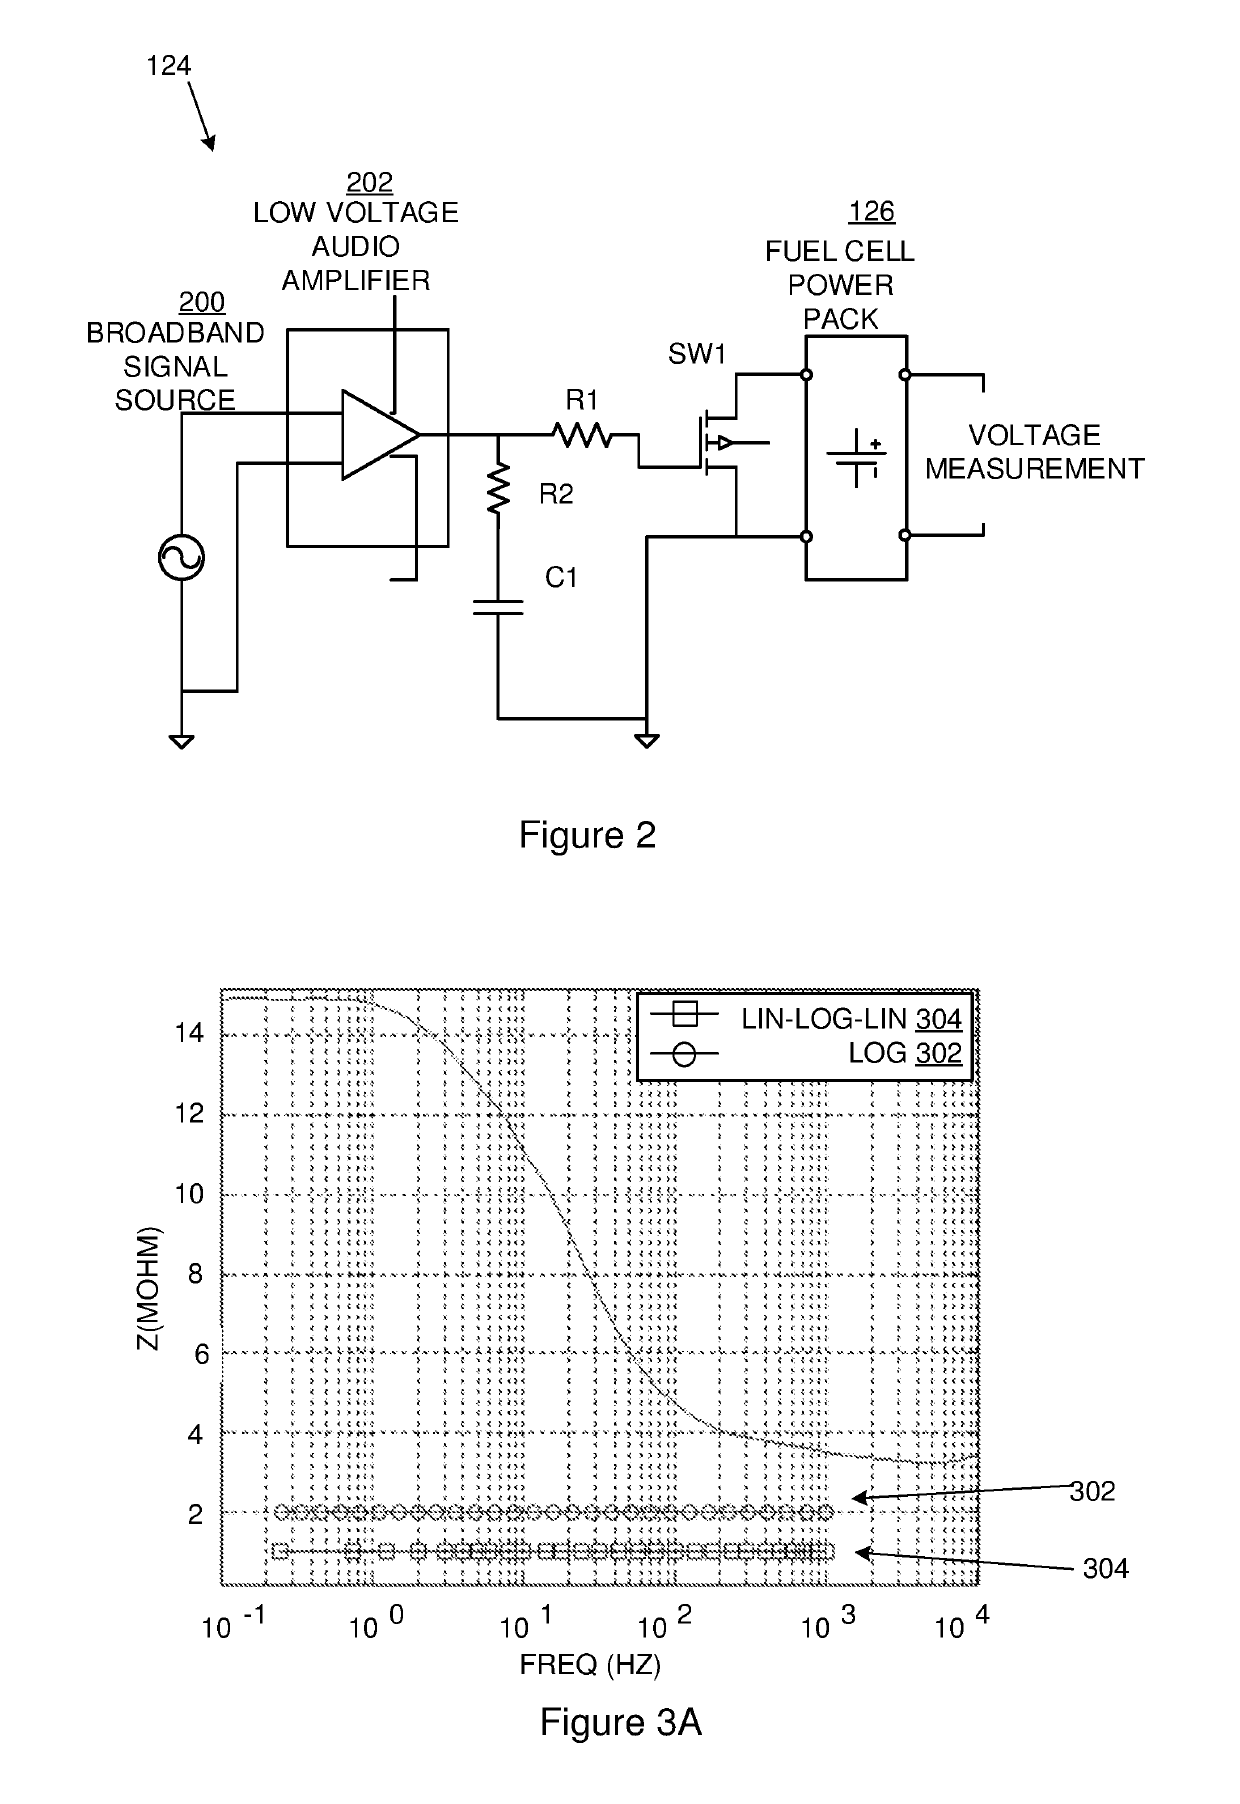 Apparatus and method for determining the condition of an electricity-producing cell